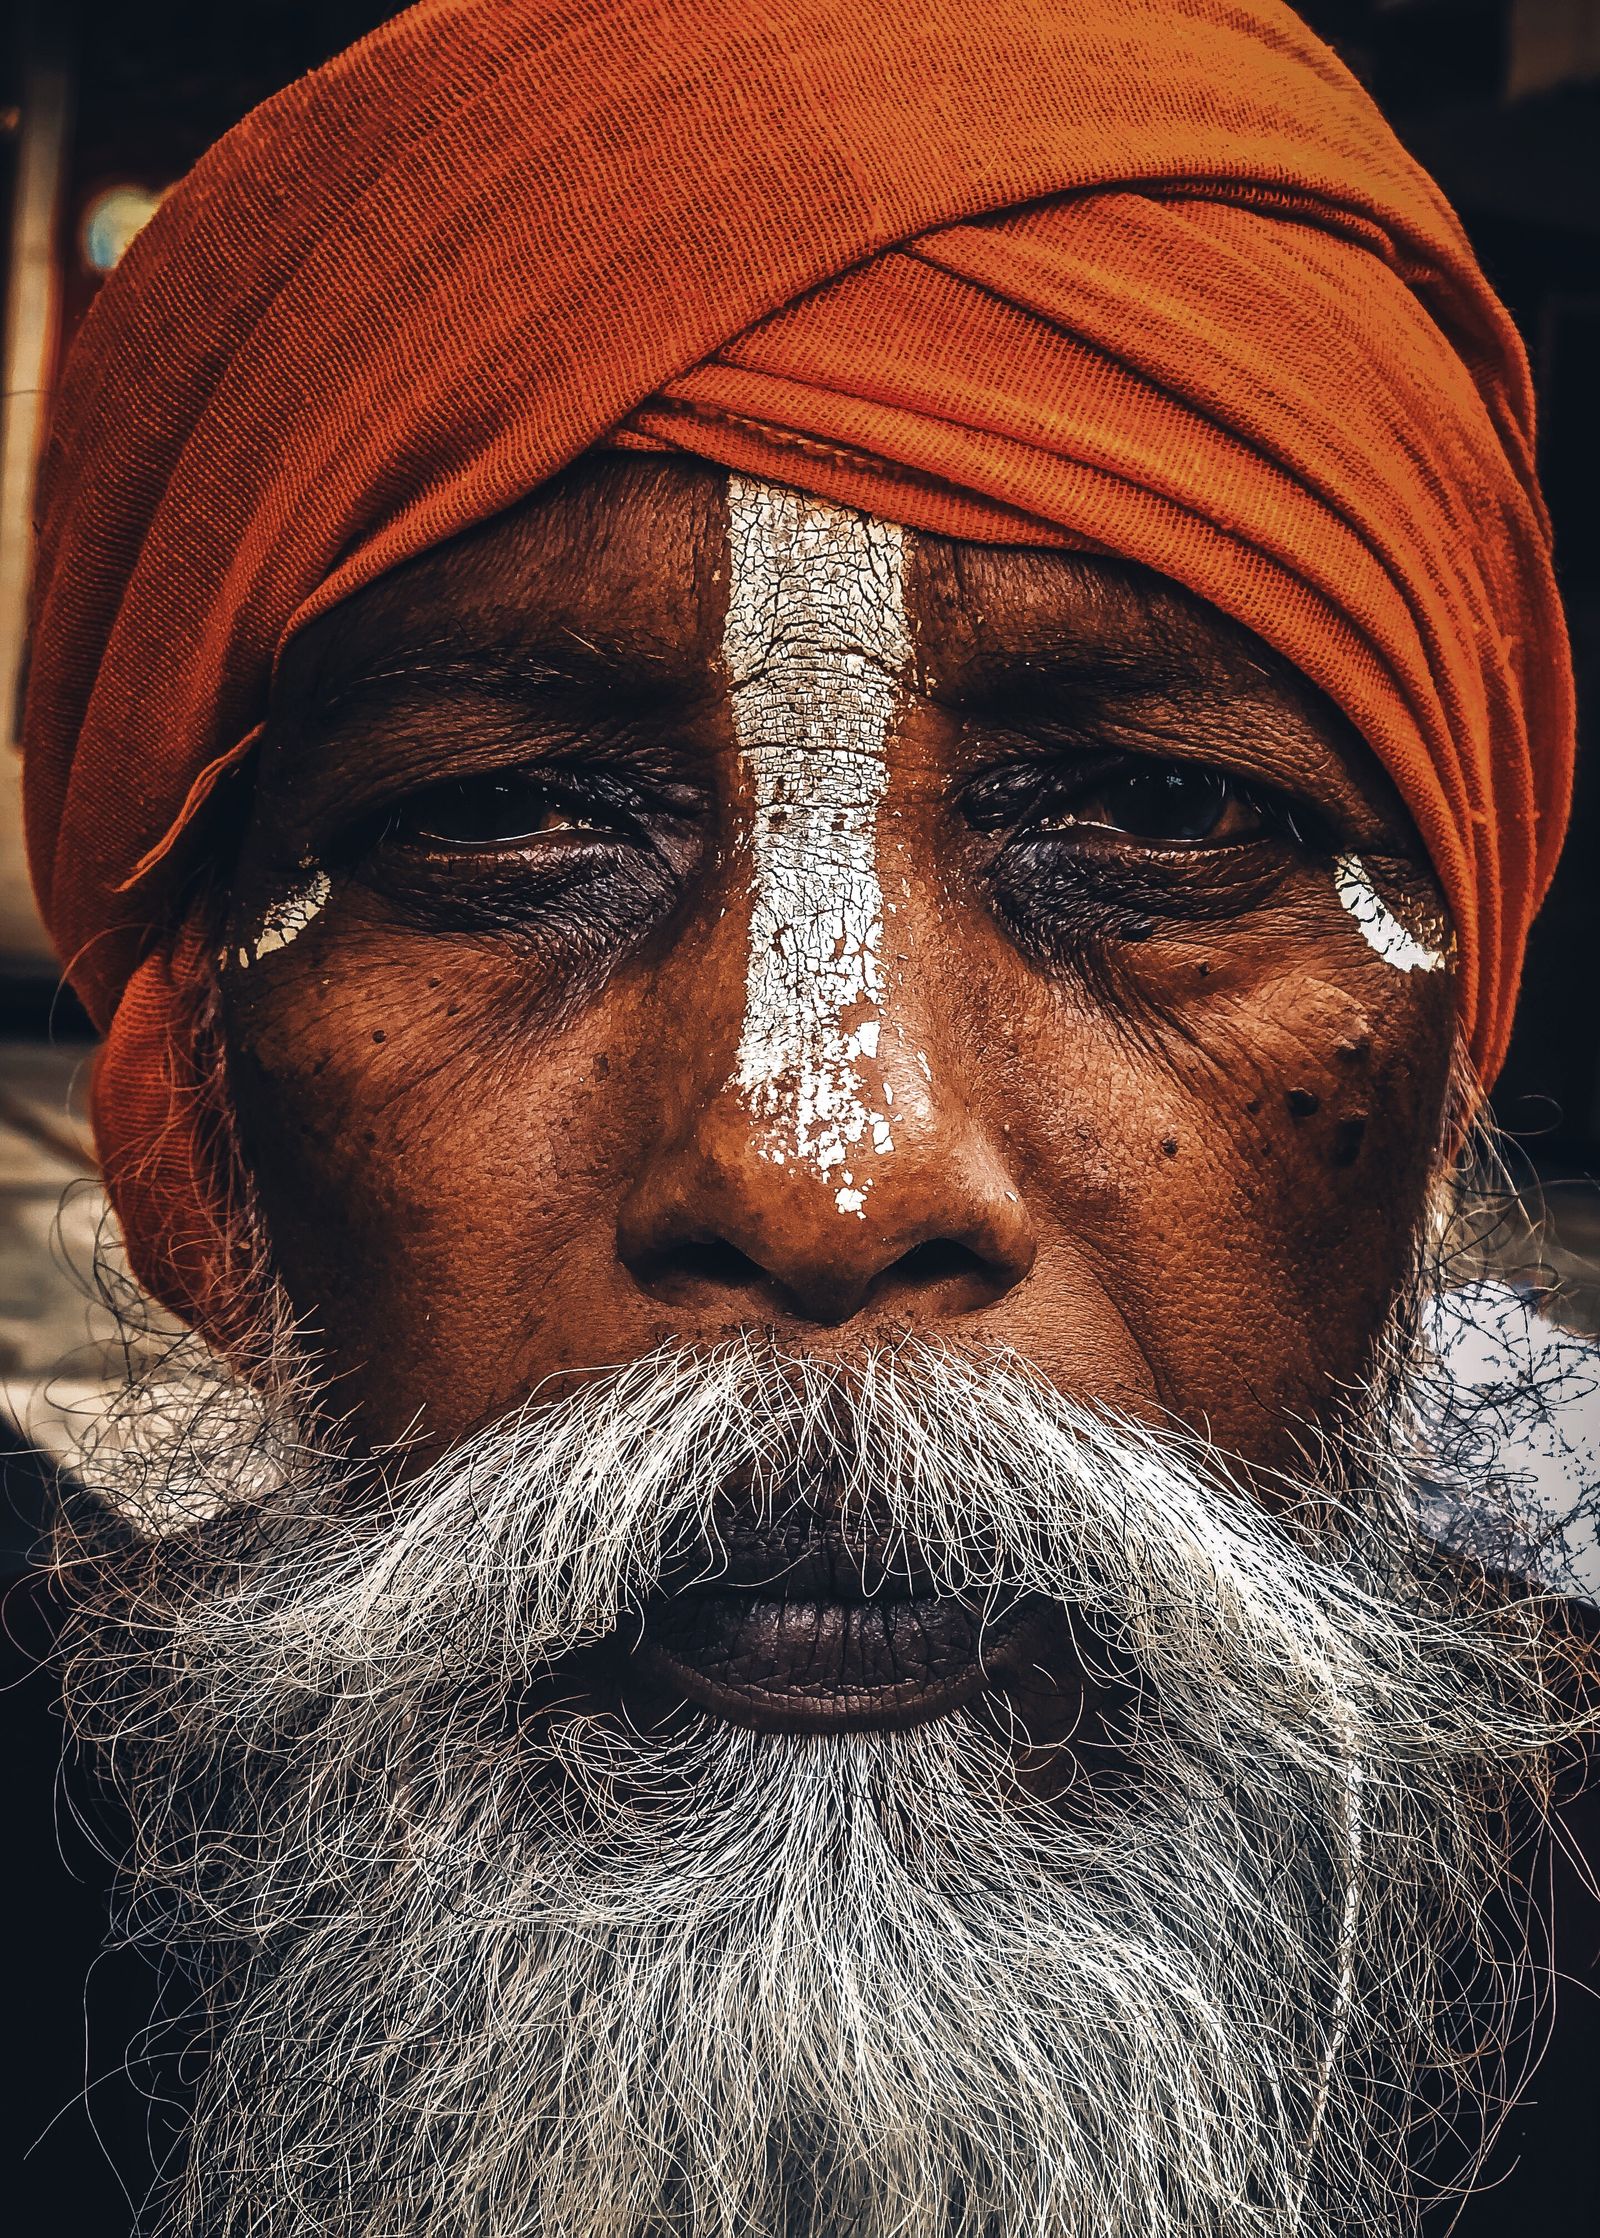 © Roy - Image from the Face of Hindustan photography project